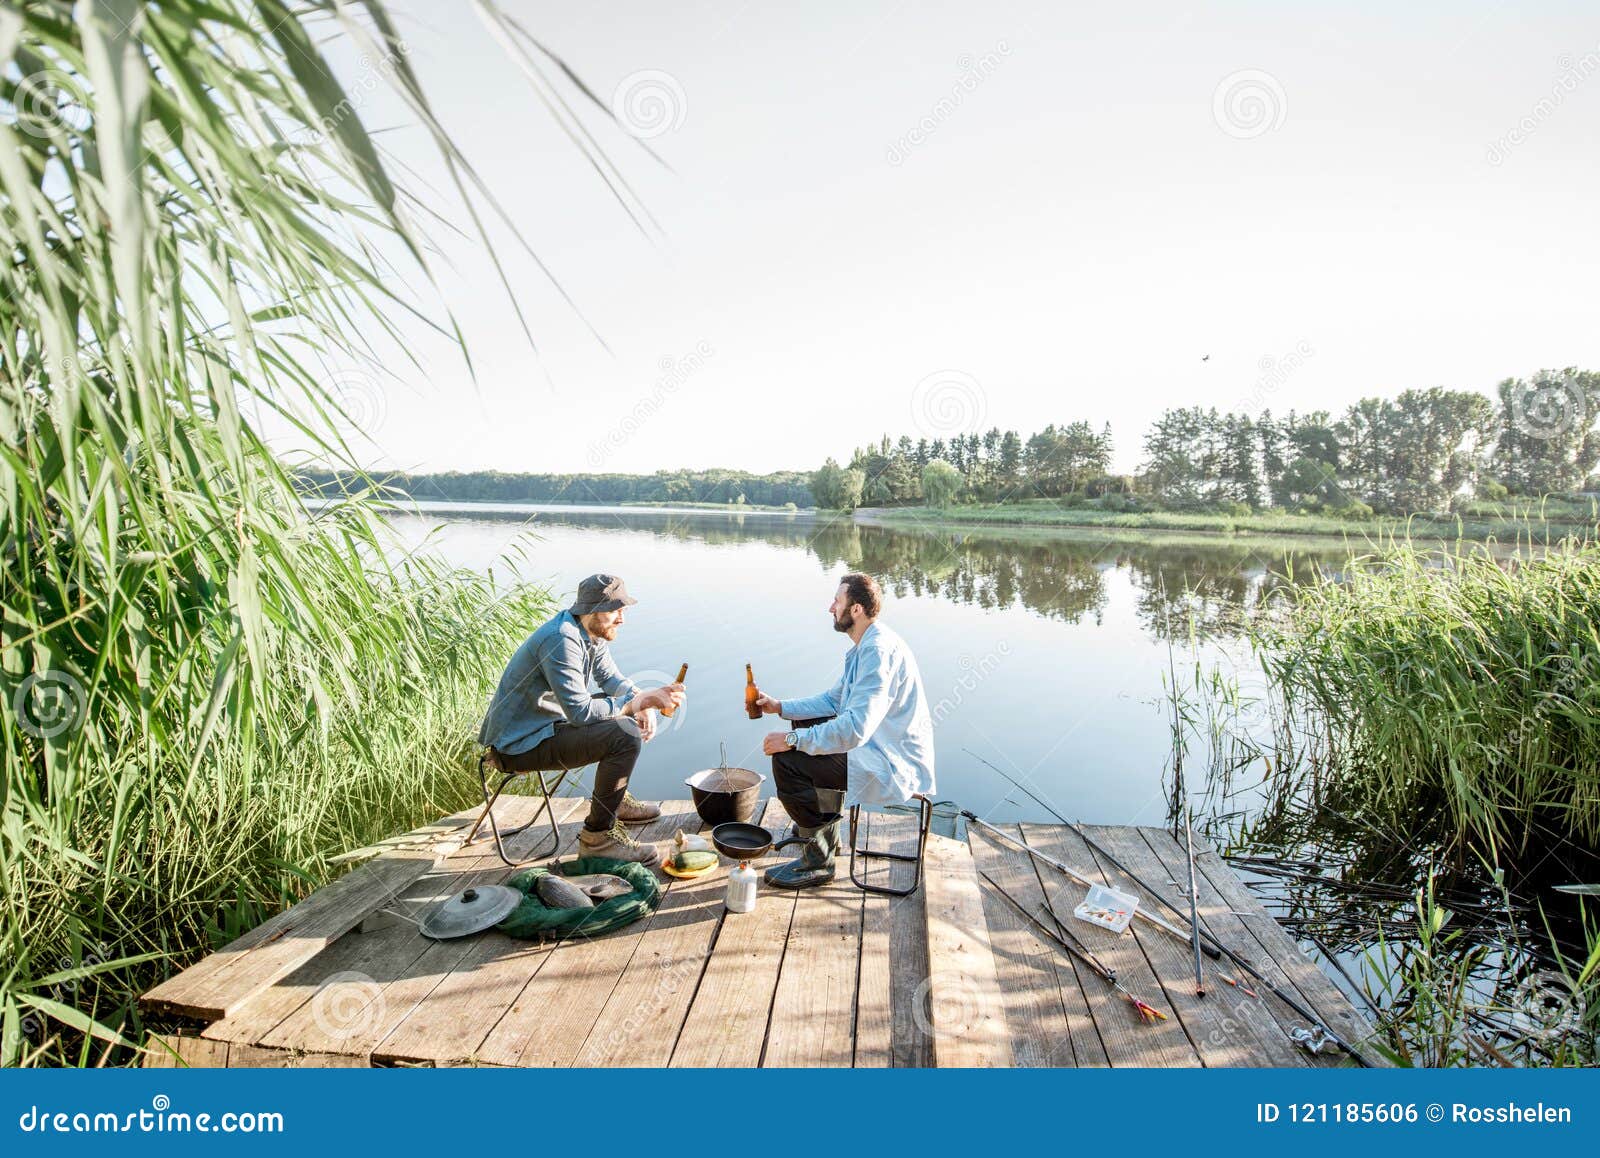 Men Relaxing with Beer while Fishing on the Lake Stock Photo